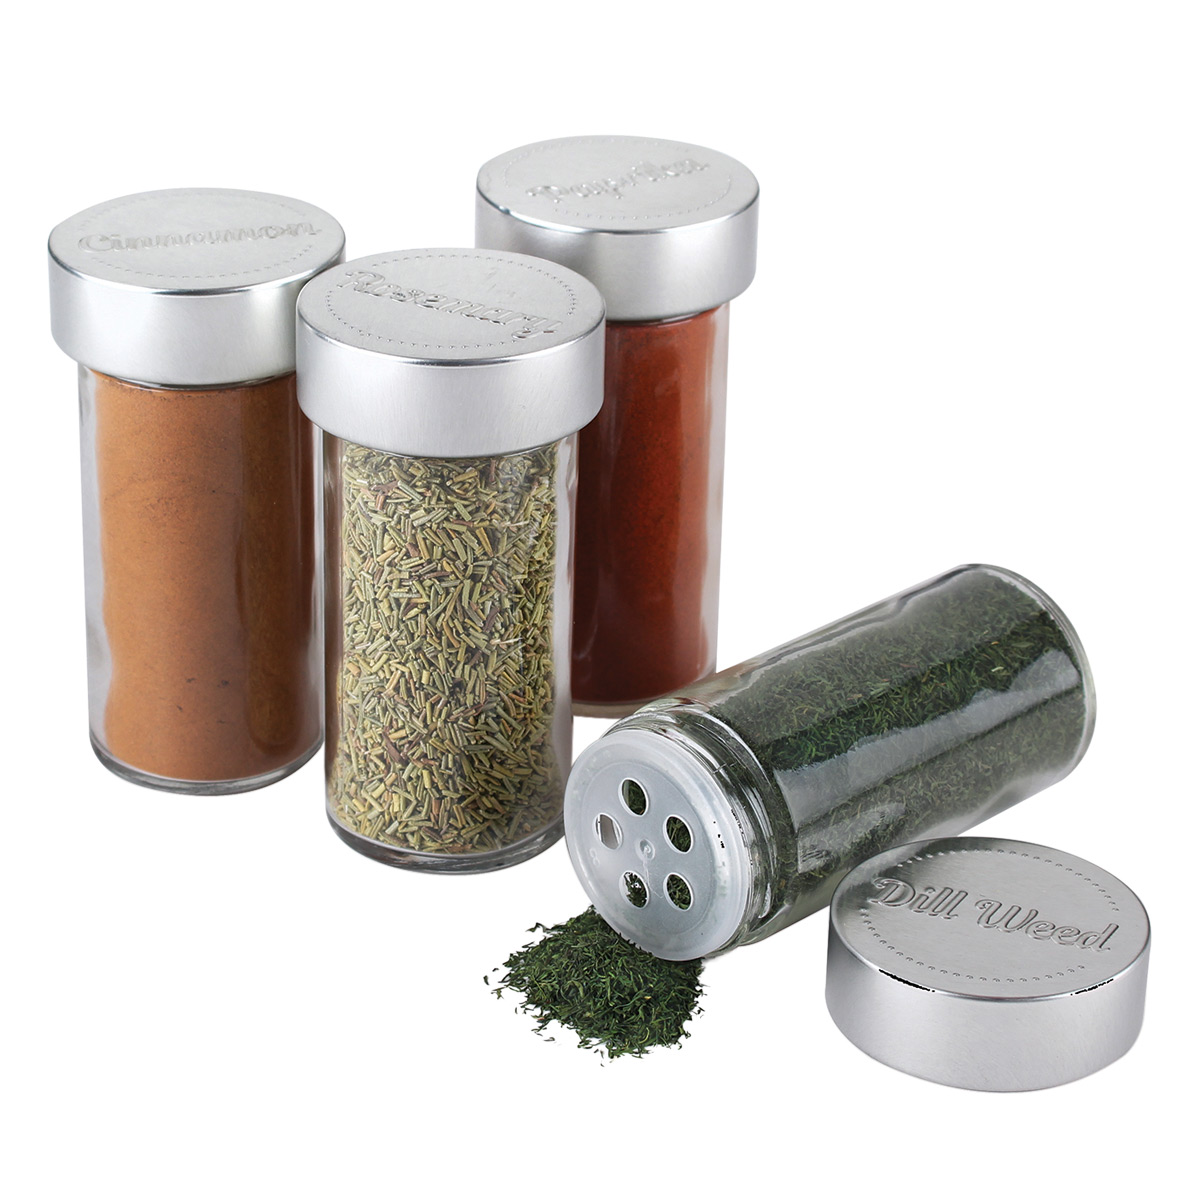 https://www.containerstore.com/catalogimages/380624/10079017-16-bottle-revolving-spice-r.jpg